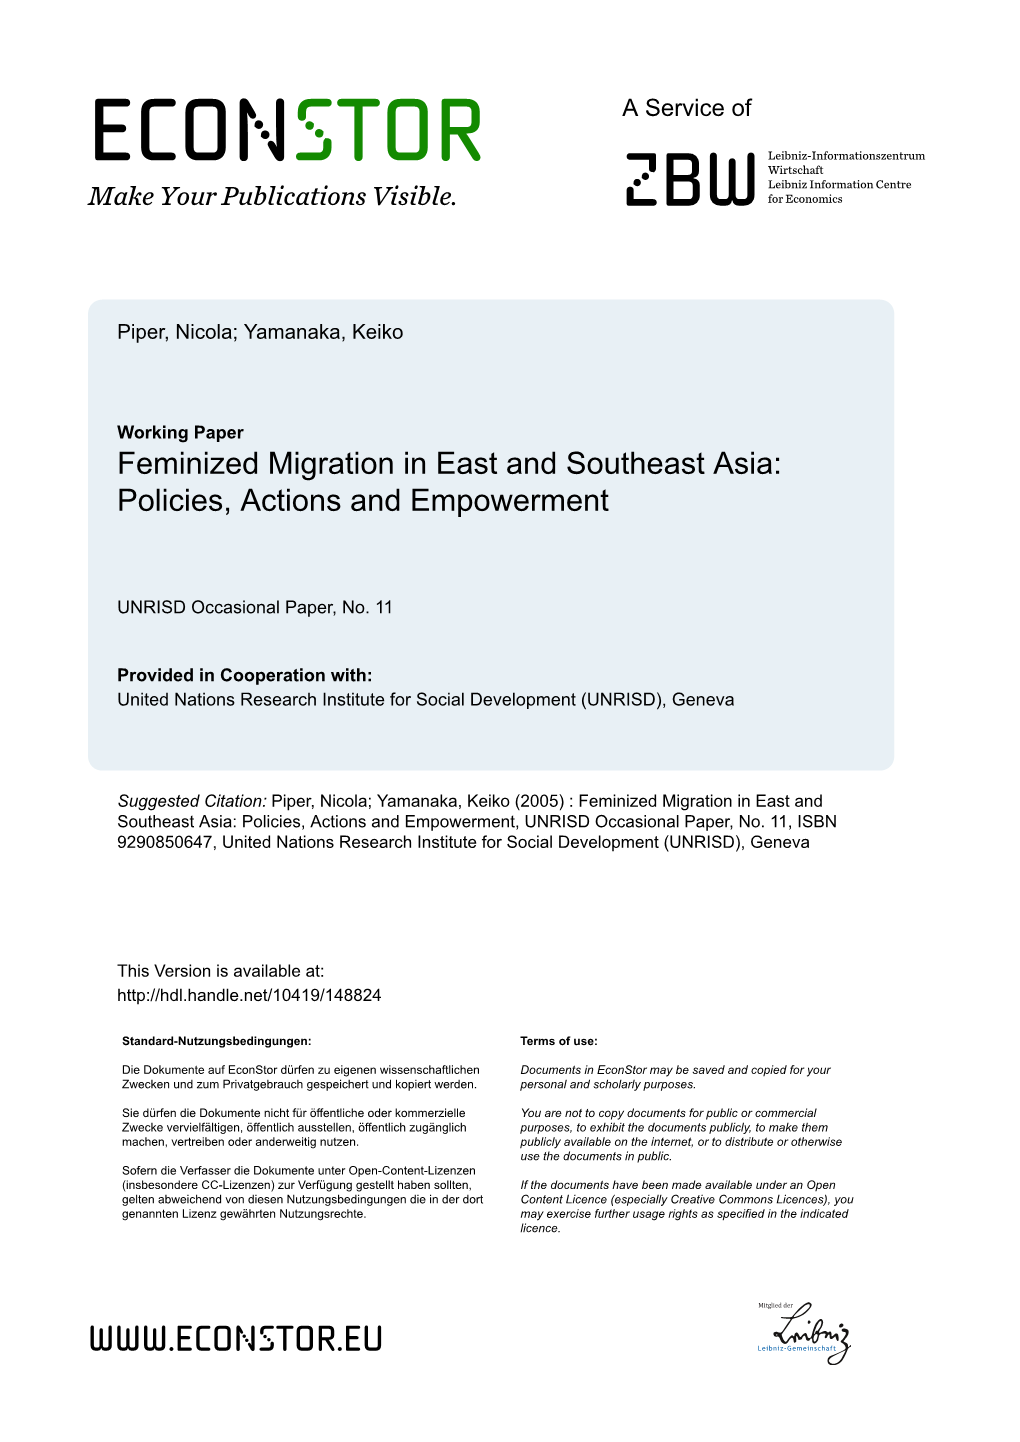 Feminized Migration in East and Southeast Asia: Policies, Actions and Empowerment